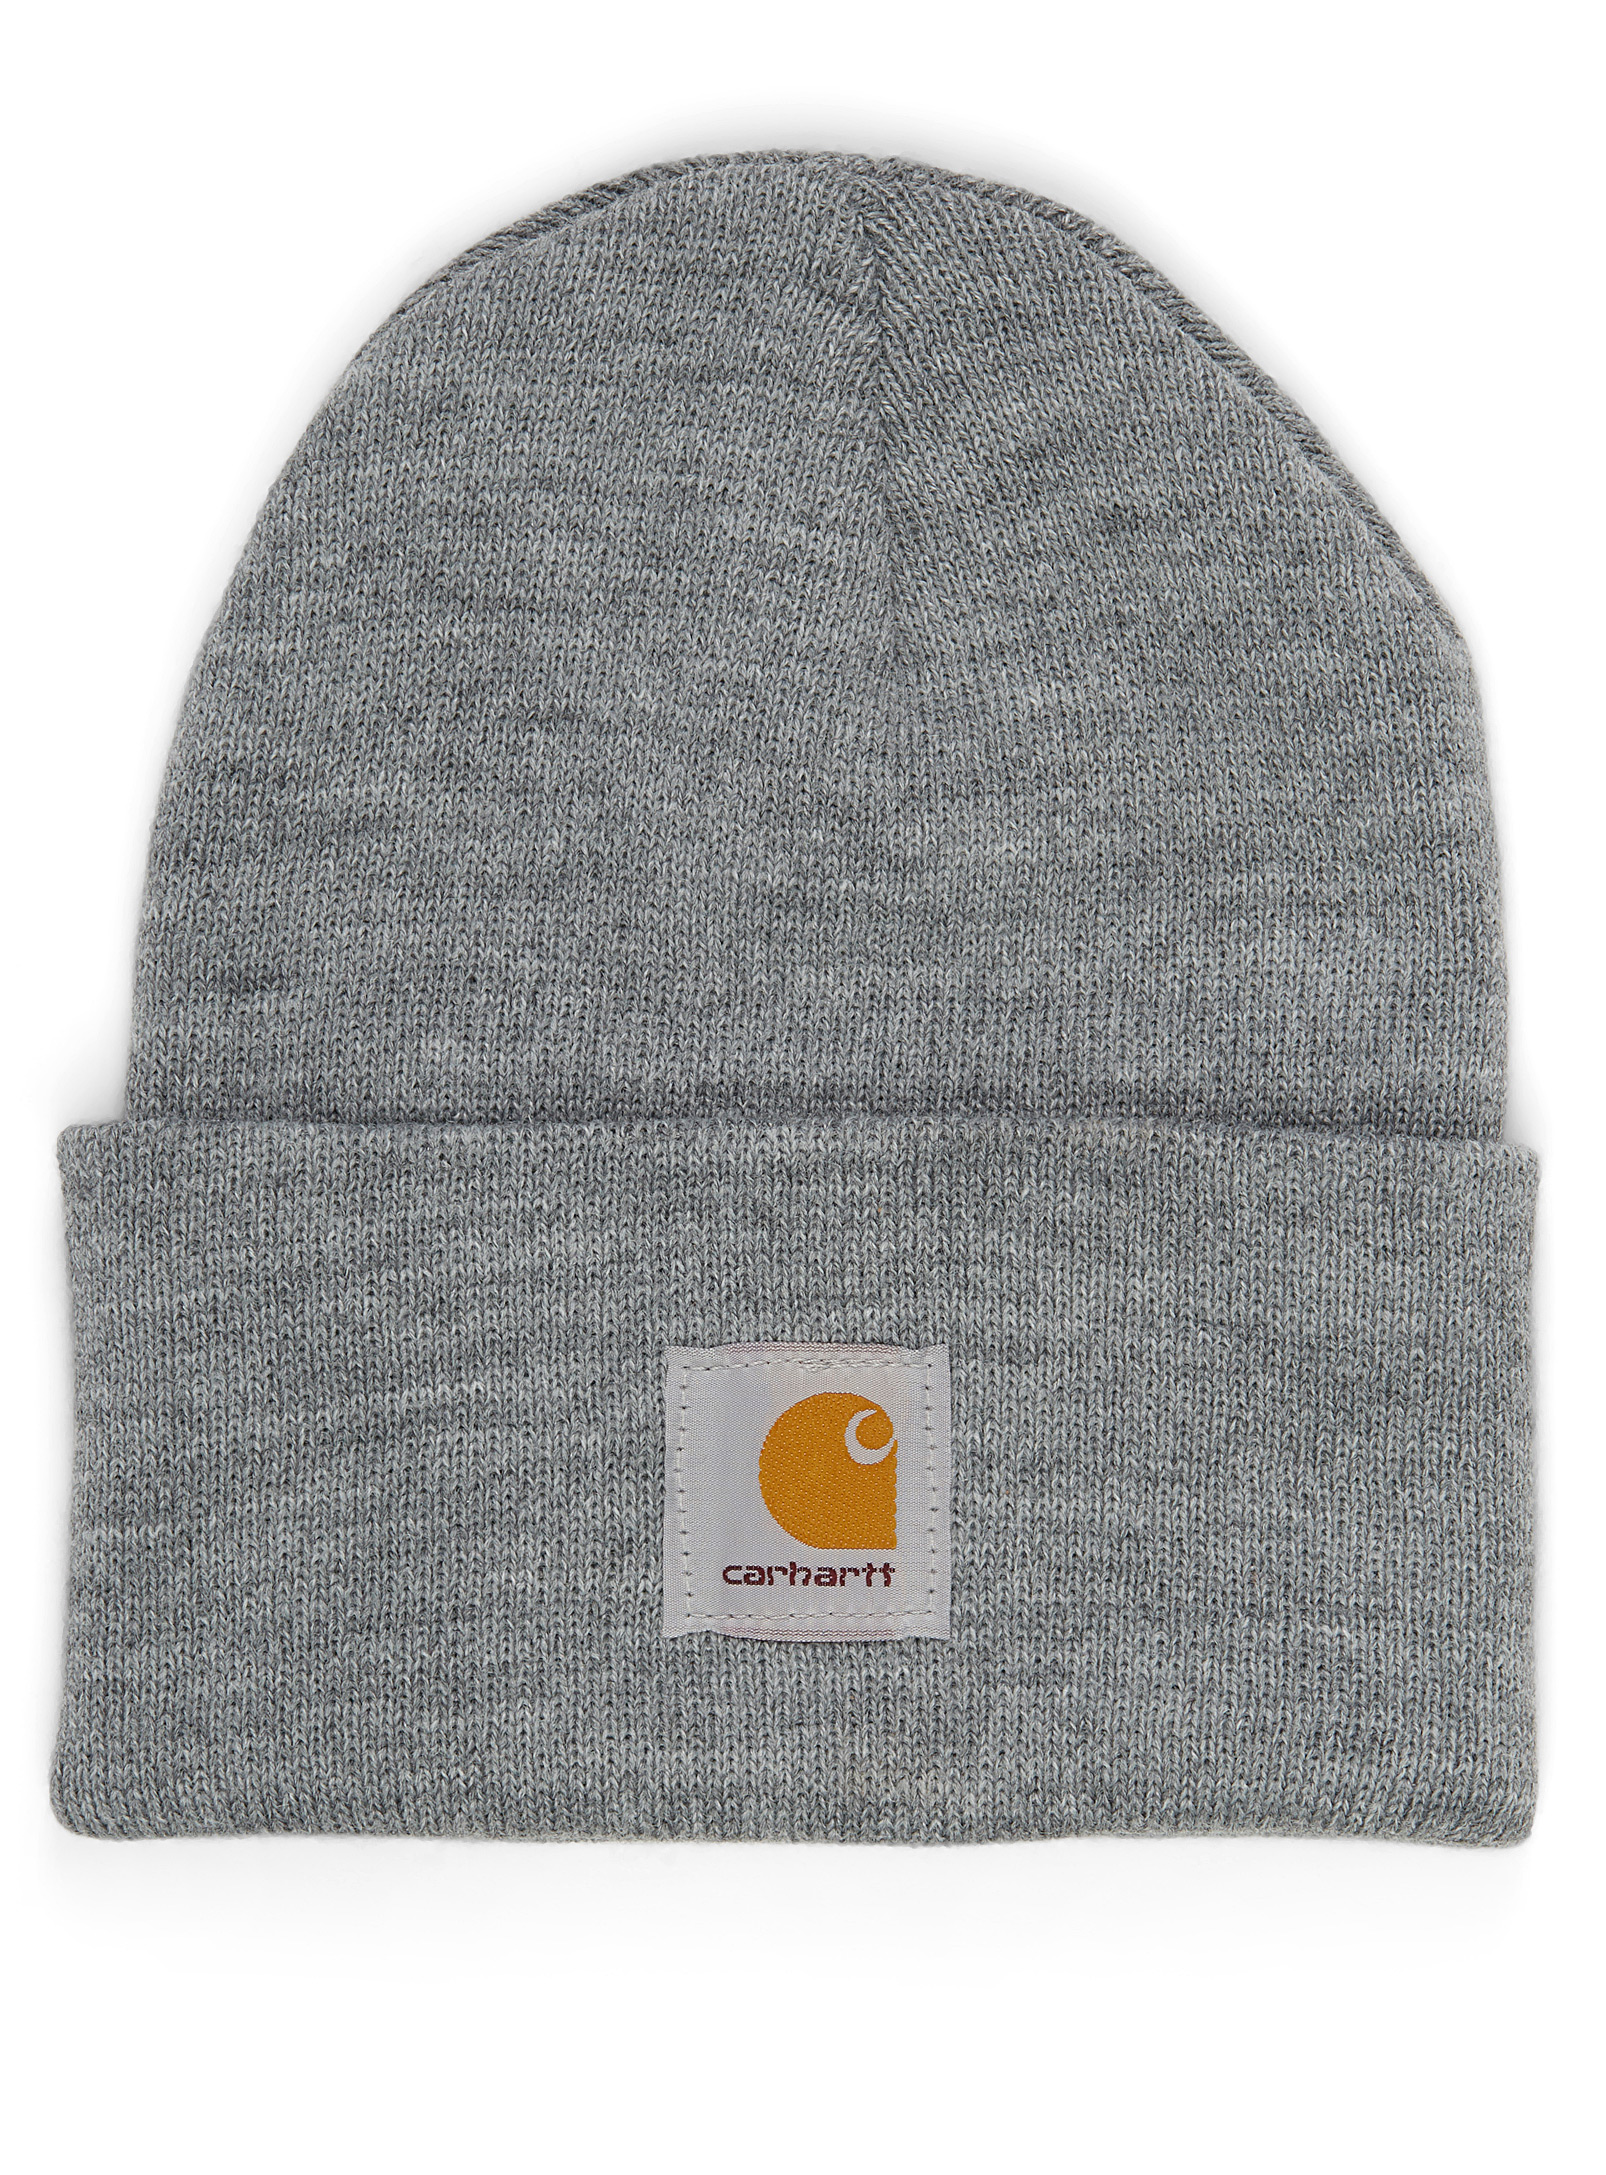 Carhartt Ribbed Worker Tuque In Grey